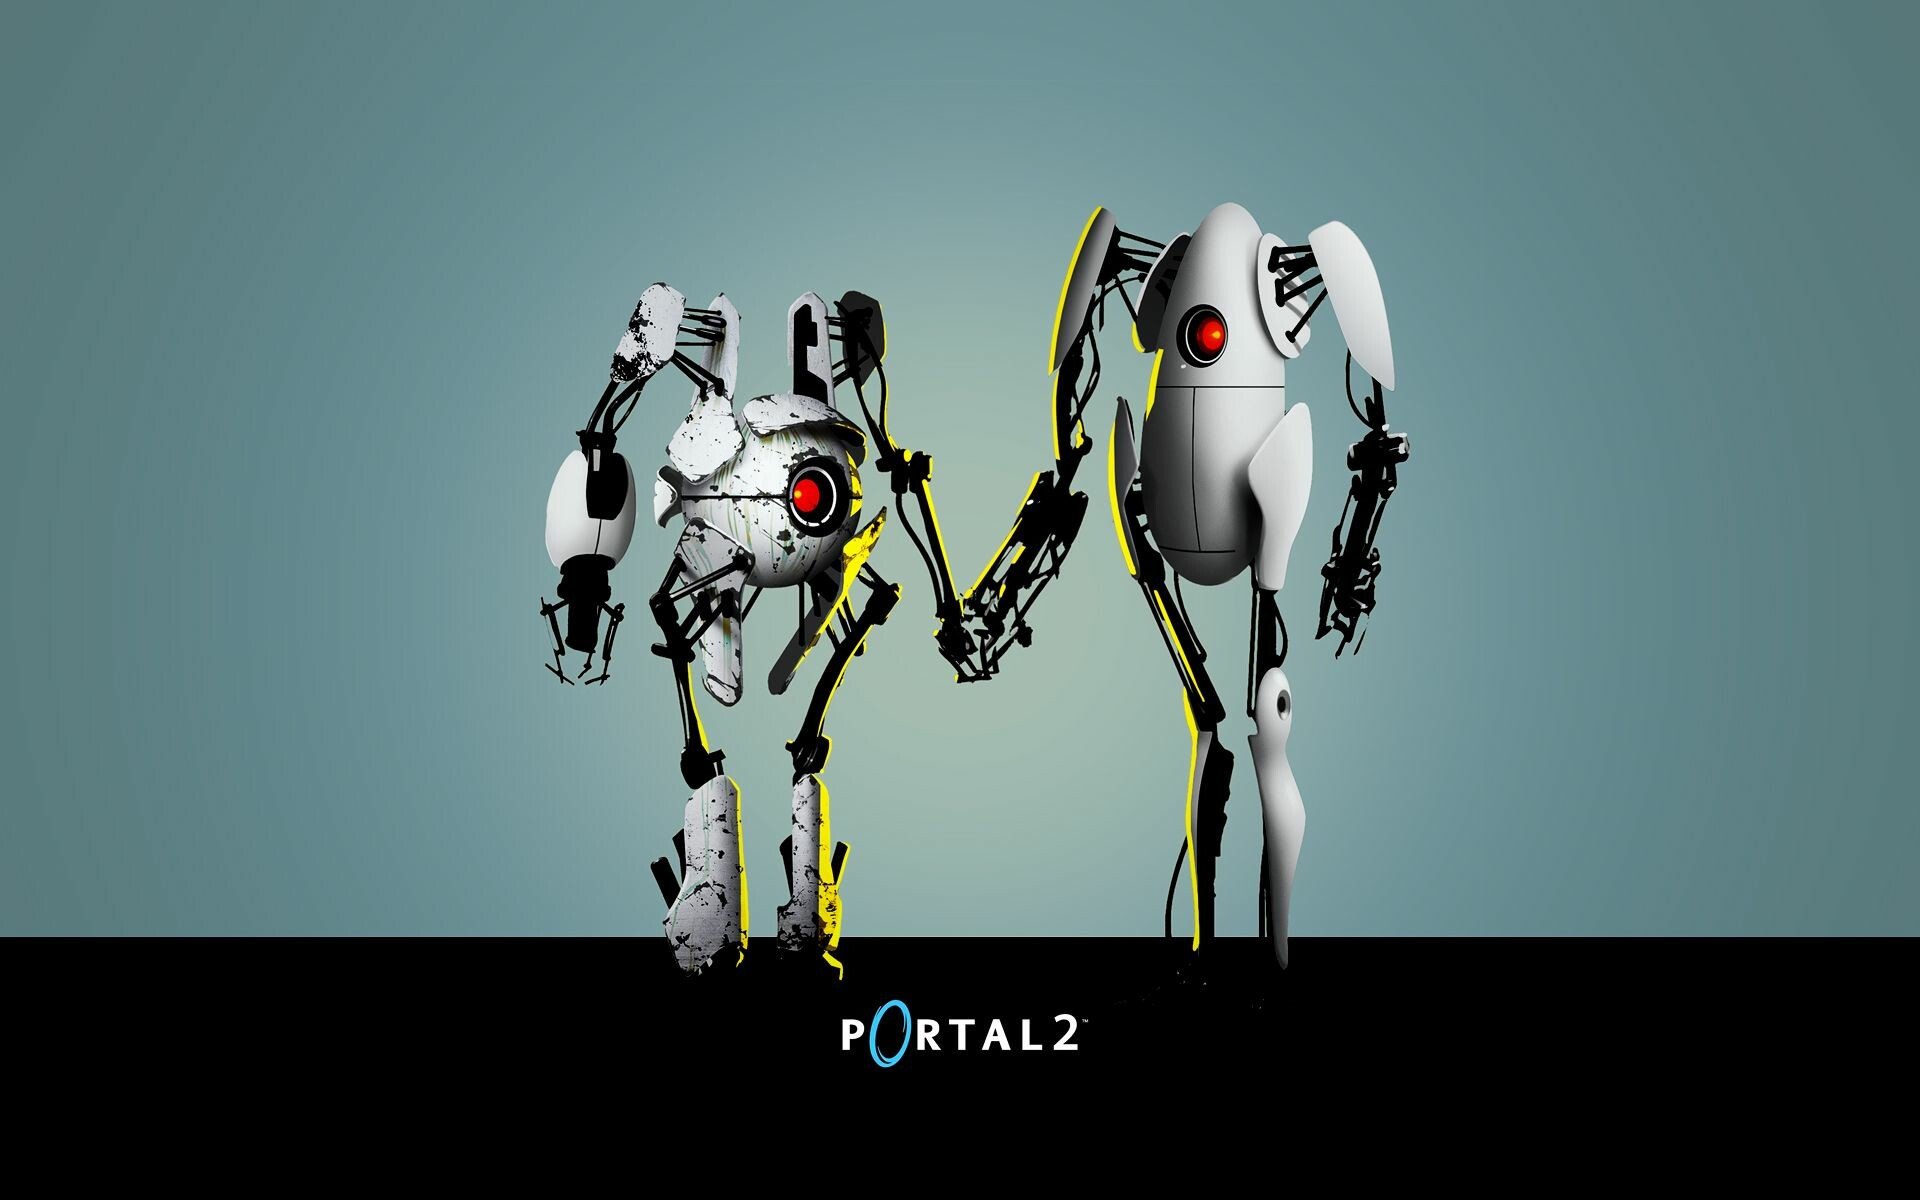 Portal 2 (Game): Challenges the player to use teleportation to traverse obstacle courses, Animation, Graphic design. 1920x1200 HD Background.